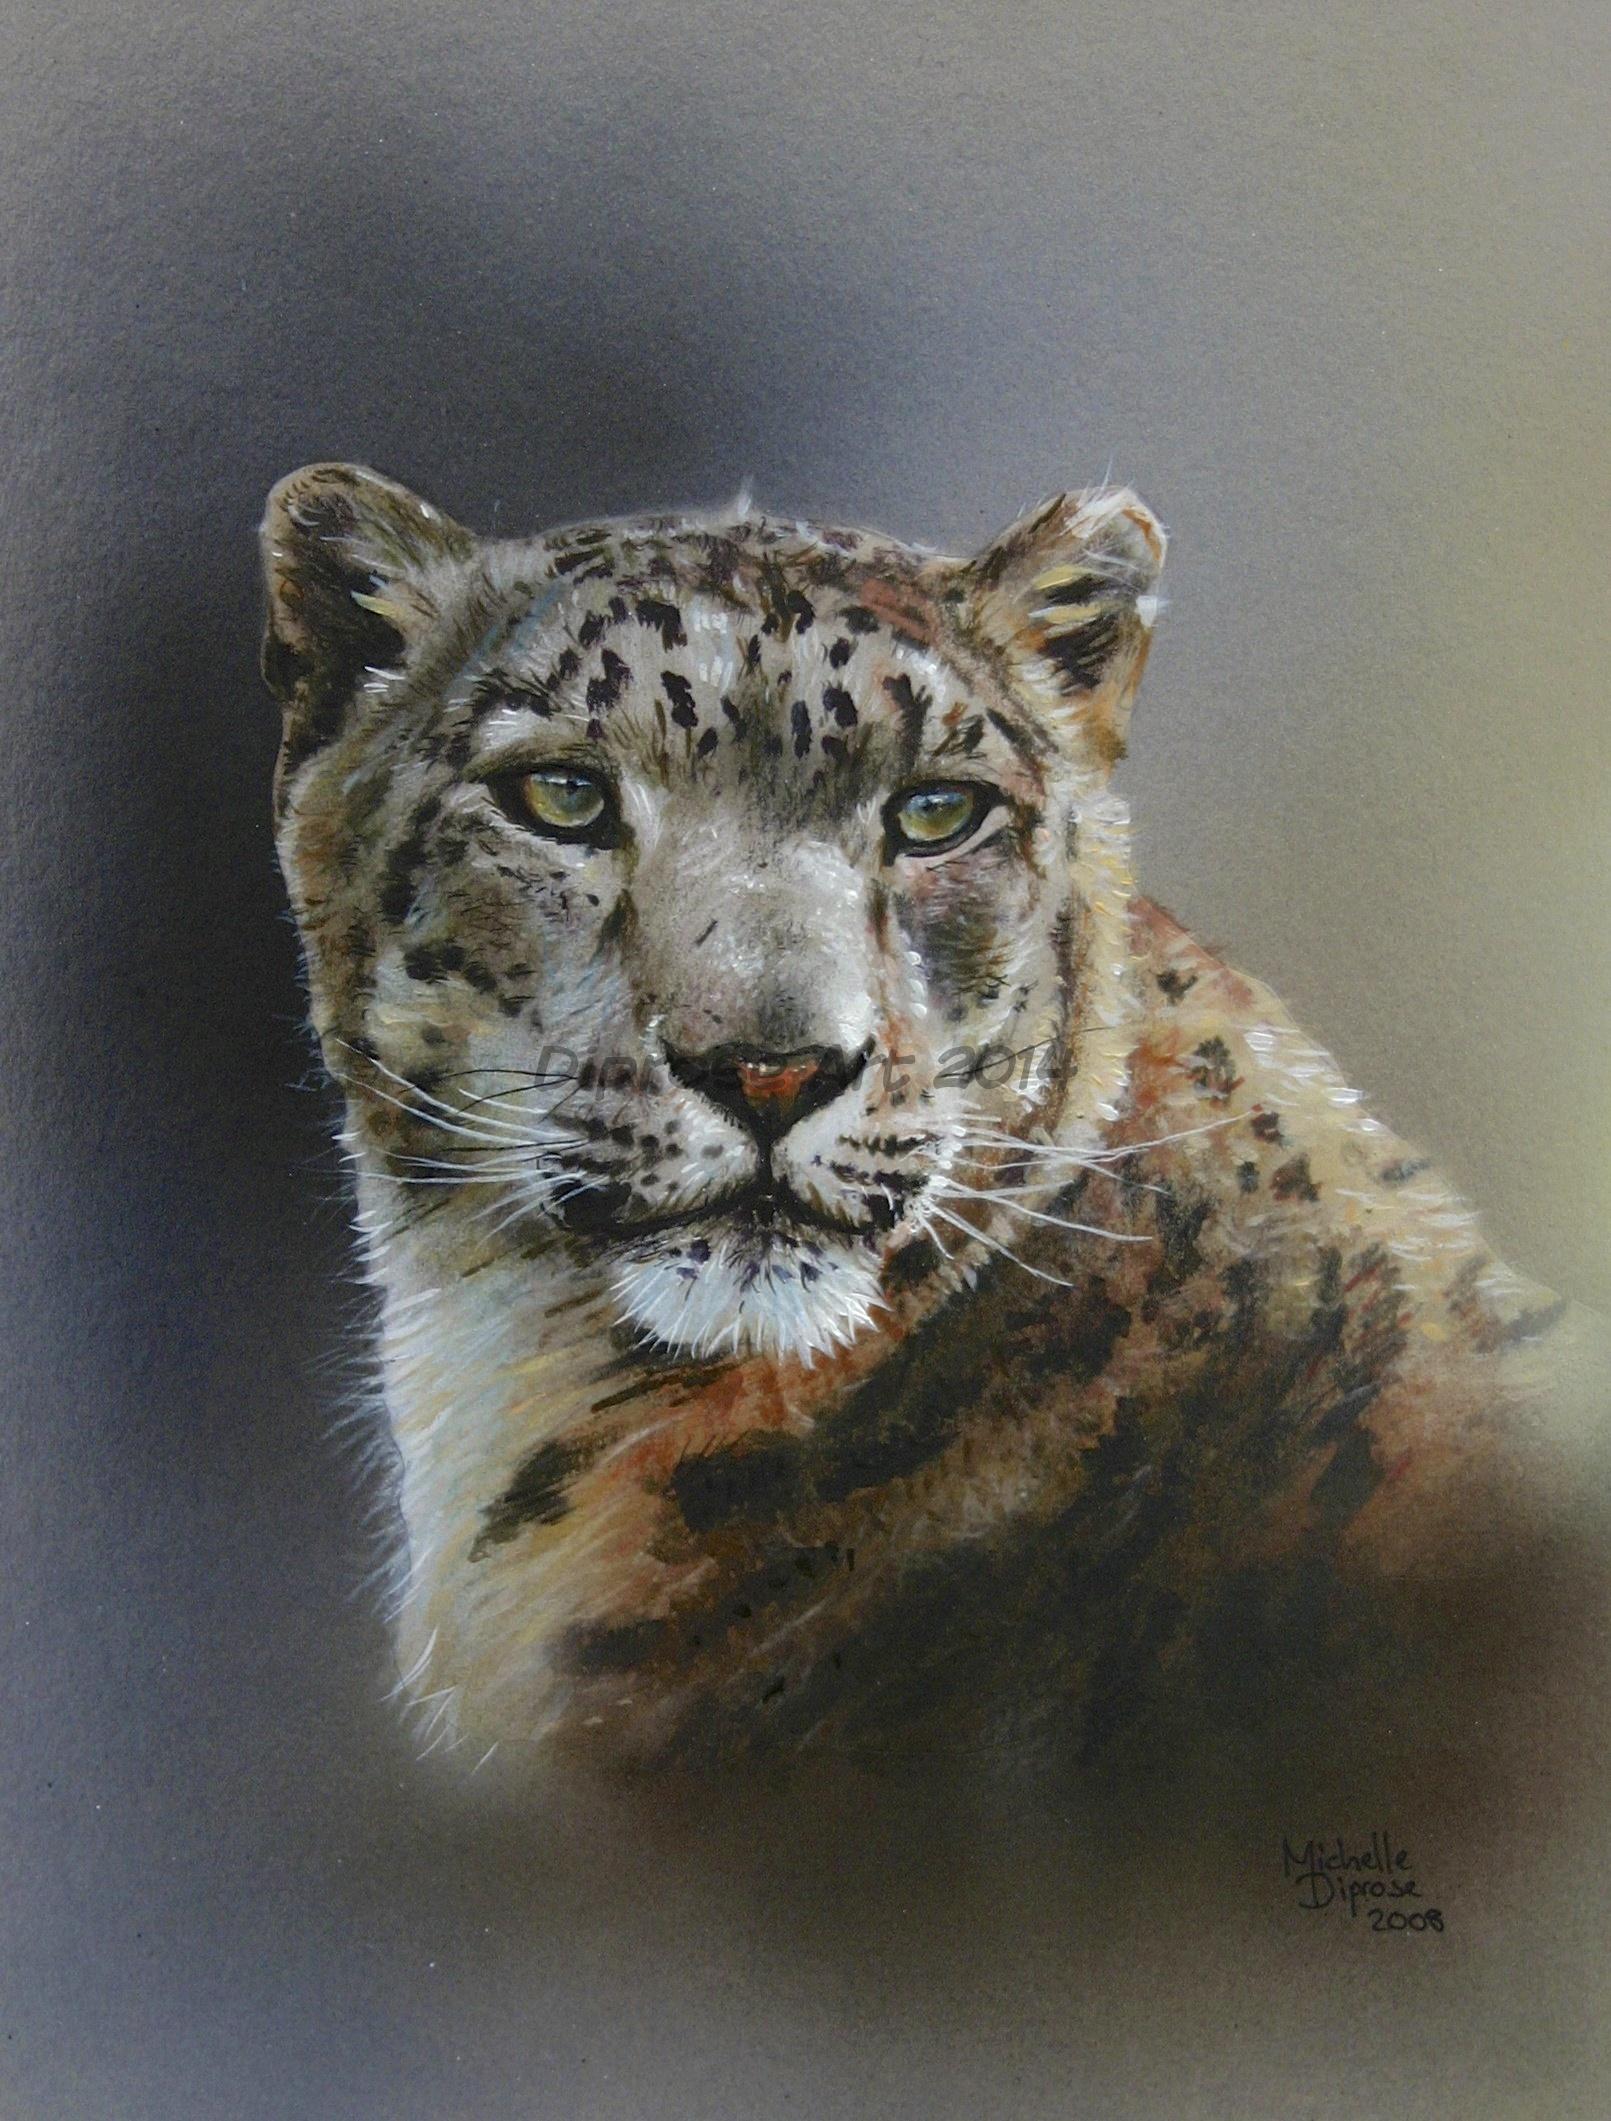 Acrylics on board - approx A4 - big cat/wildlife painting  - I was lucky enough to have a day out at the Smarden Wildlife Heritage Foundation and photographed this amazing snow leopard.  I had to paint him too.